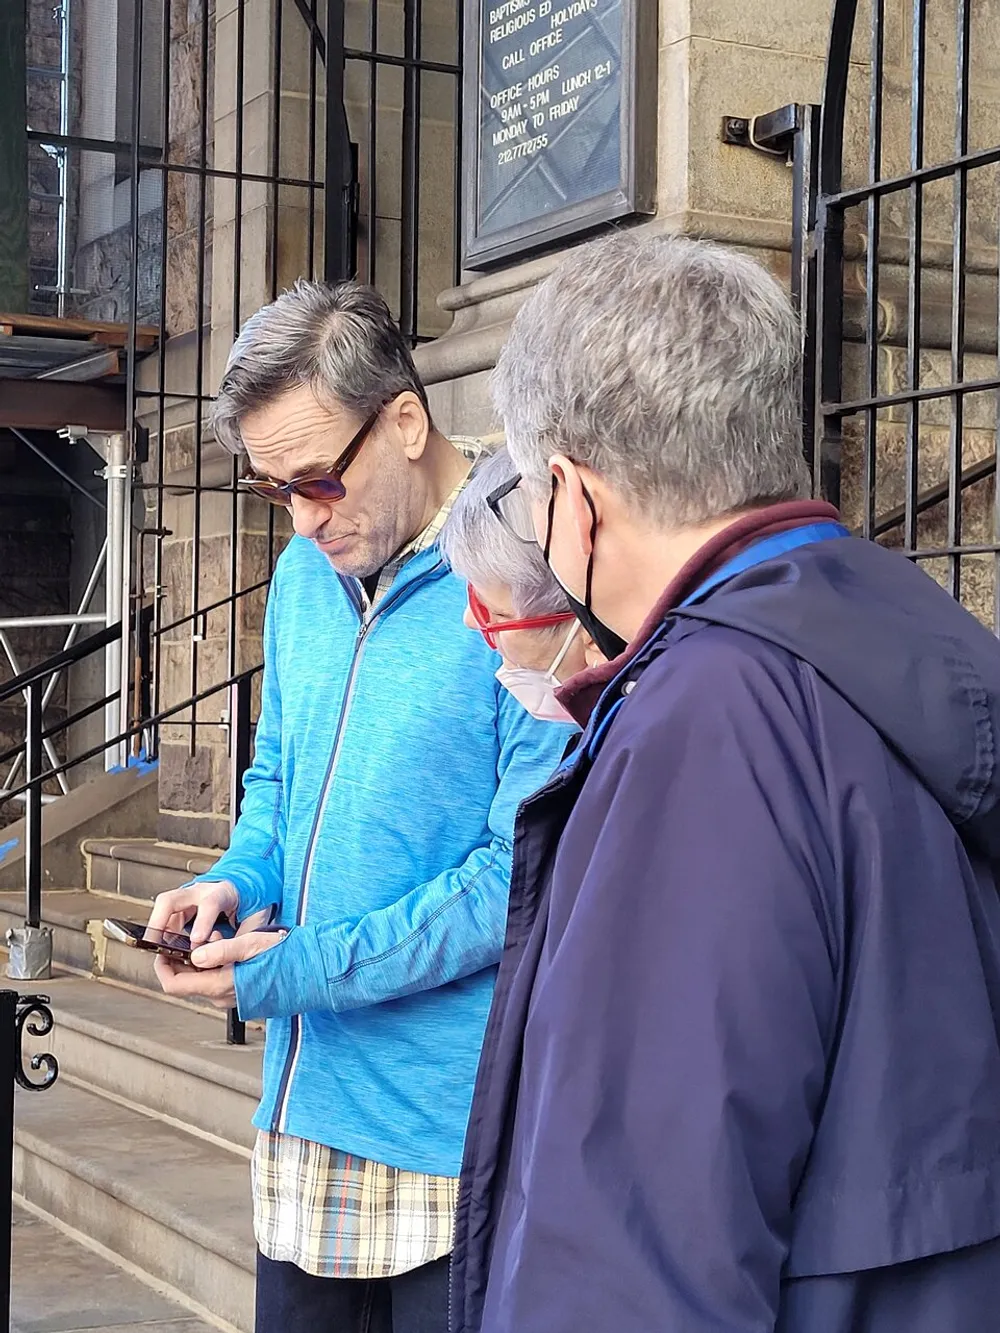 Three people appear engrossed in looking at something on a smartphone outside a building with a sign indicating office hours for religious services